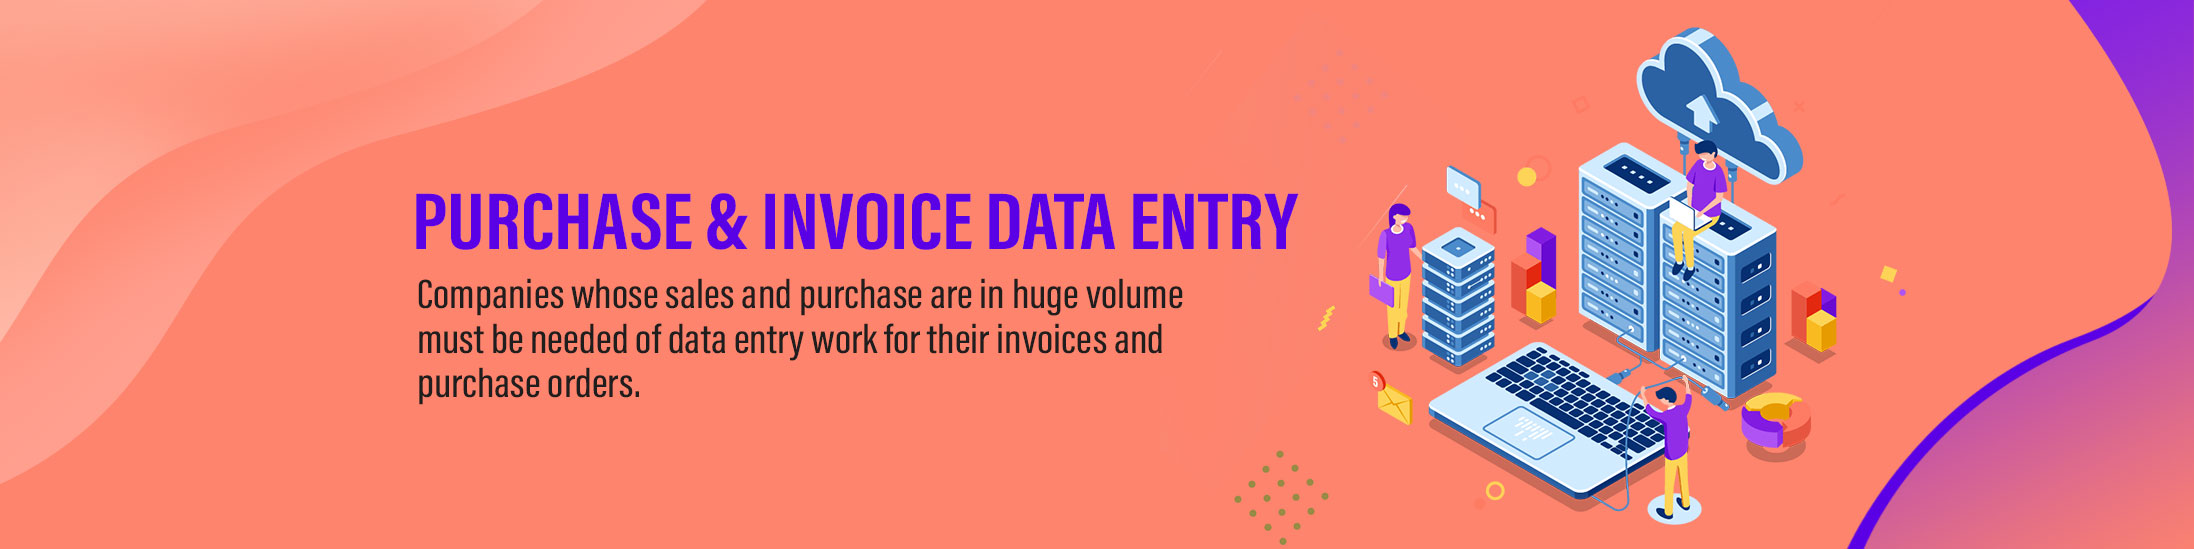 Purchase & Invoice Data Entry Service